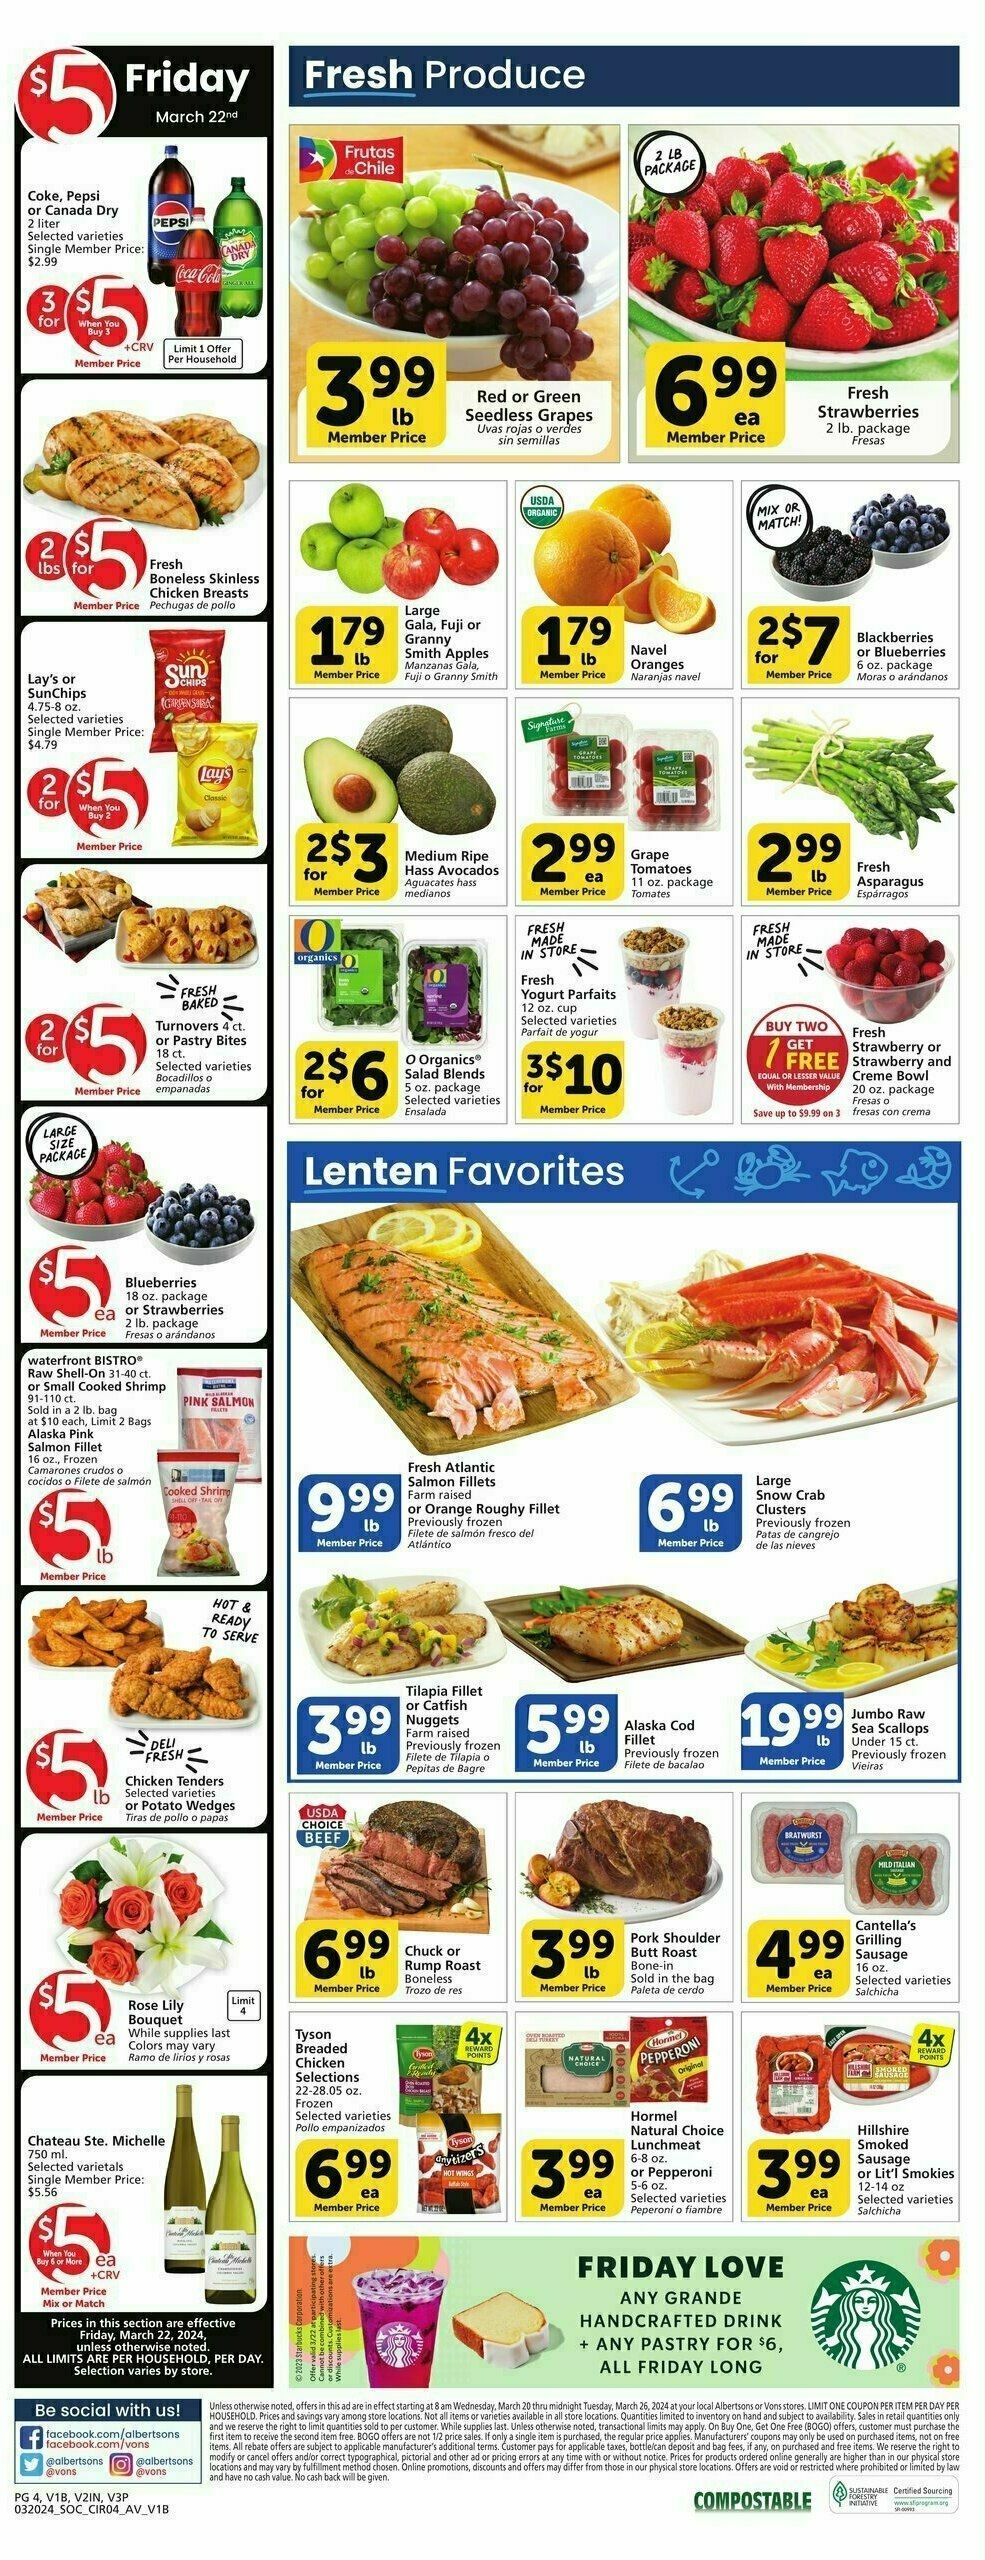 Vons Weekly Ad from March 20